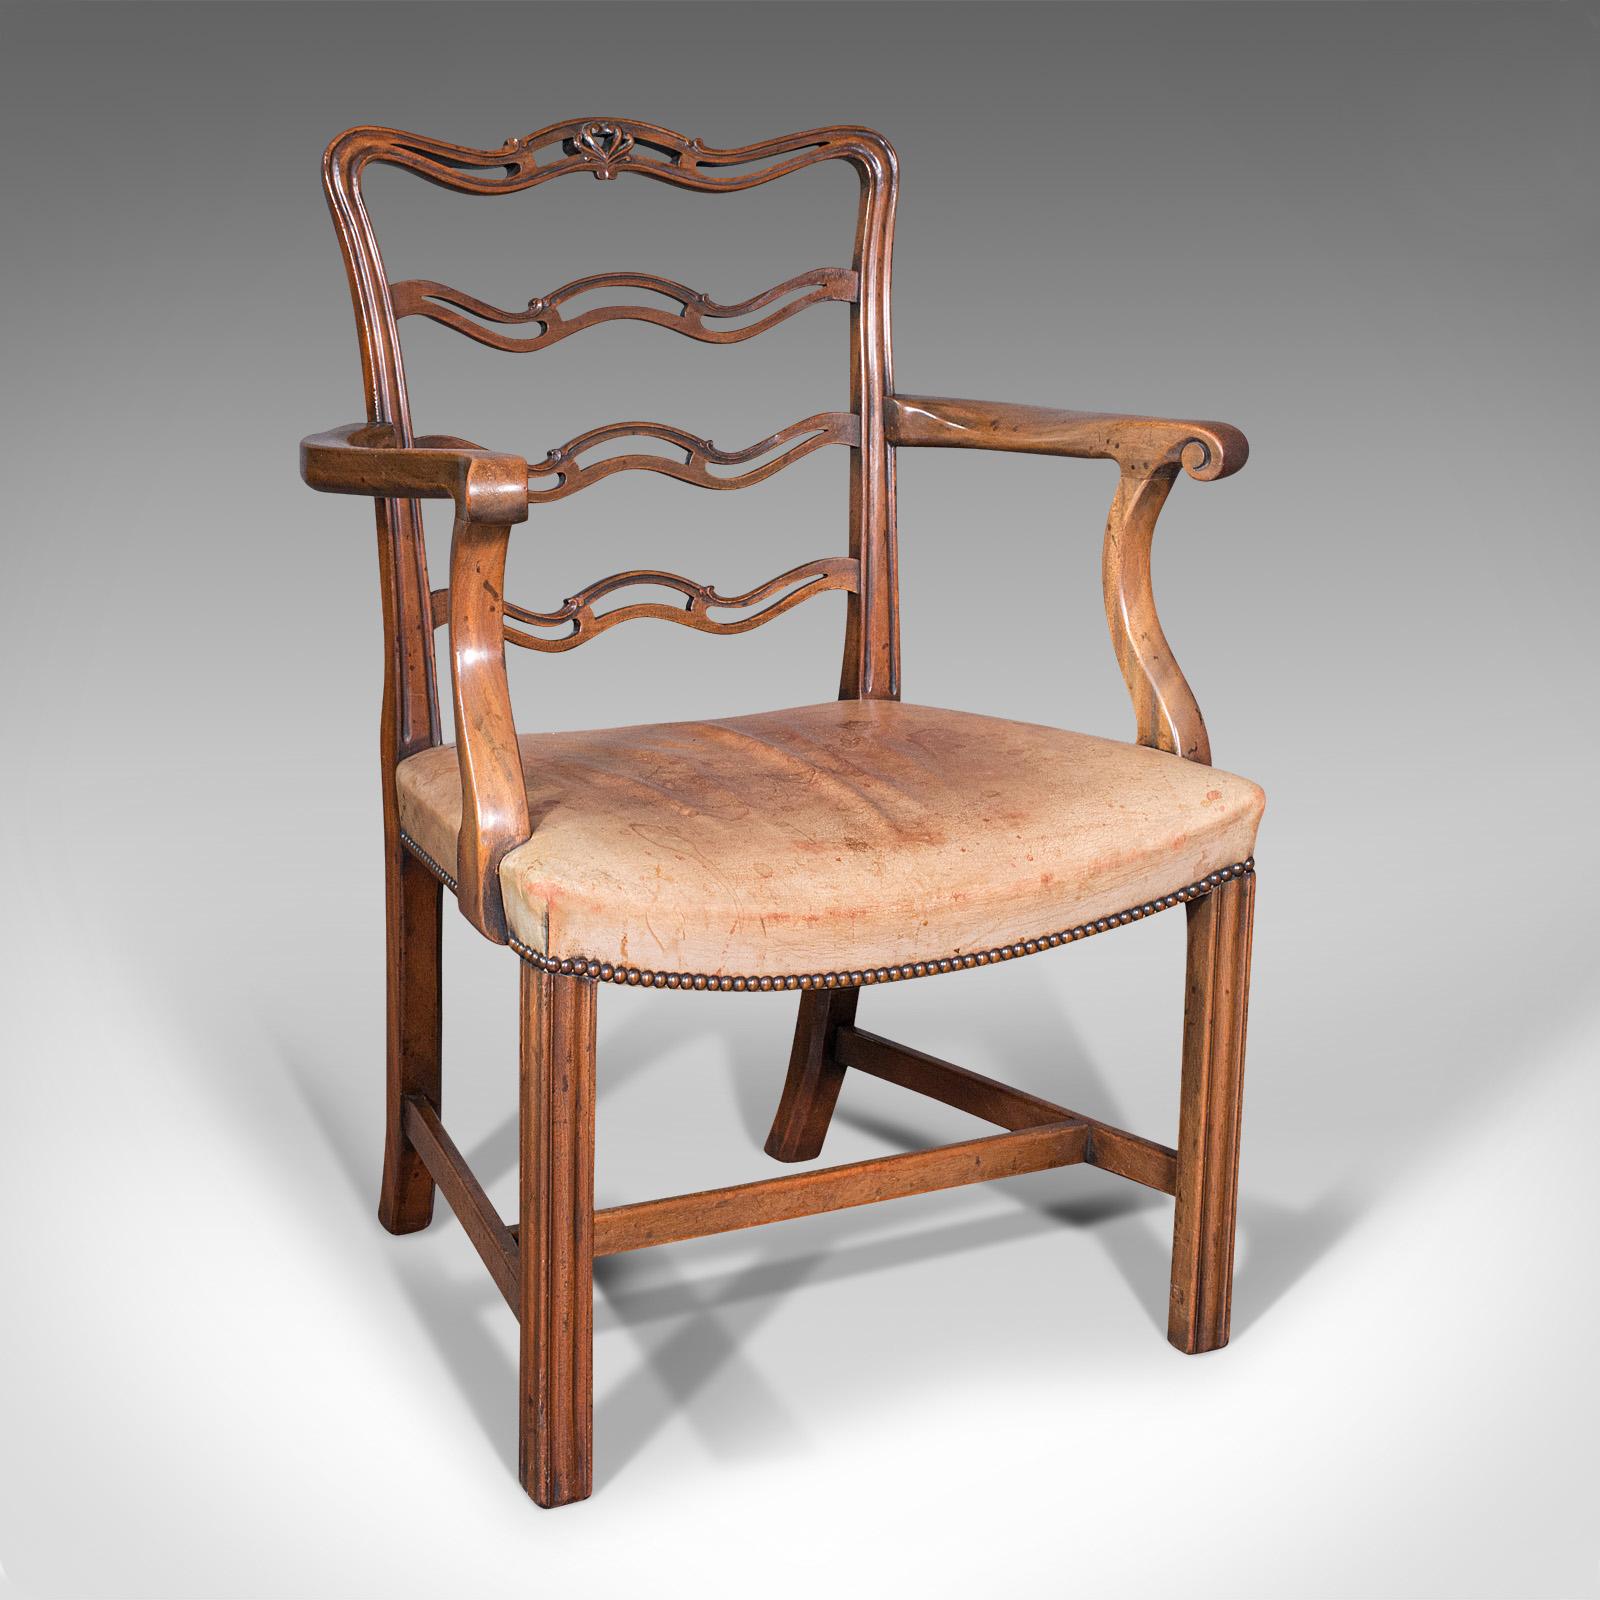 This is a set of four vintage ladder back chairs. An Irish, mahogany carver and seat, dating to the Art Deco period, circa 1940.

Resplendent in Irish Chippendale revival taste
Generously wide in profile, affording comfortable seating
Displaying